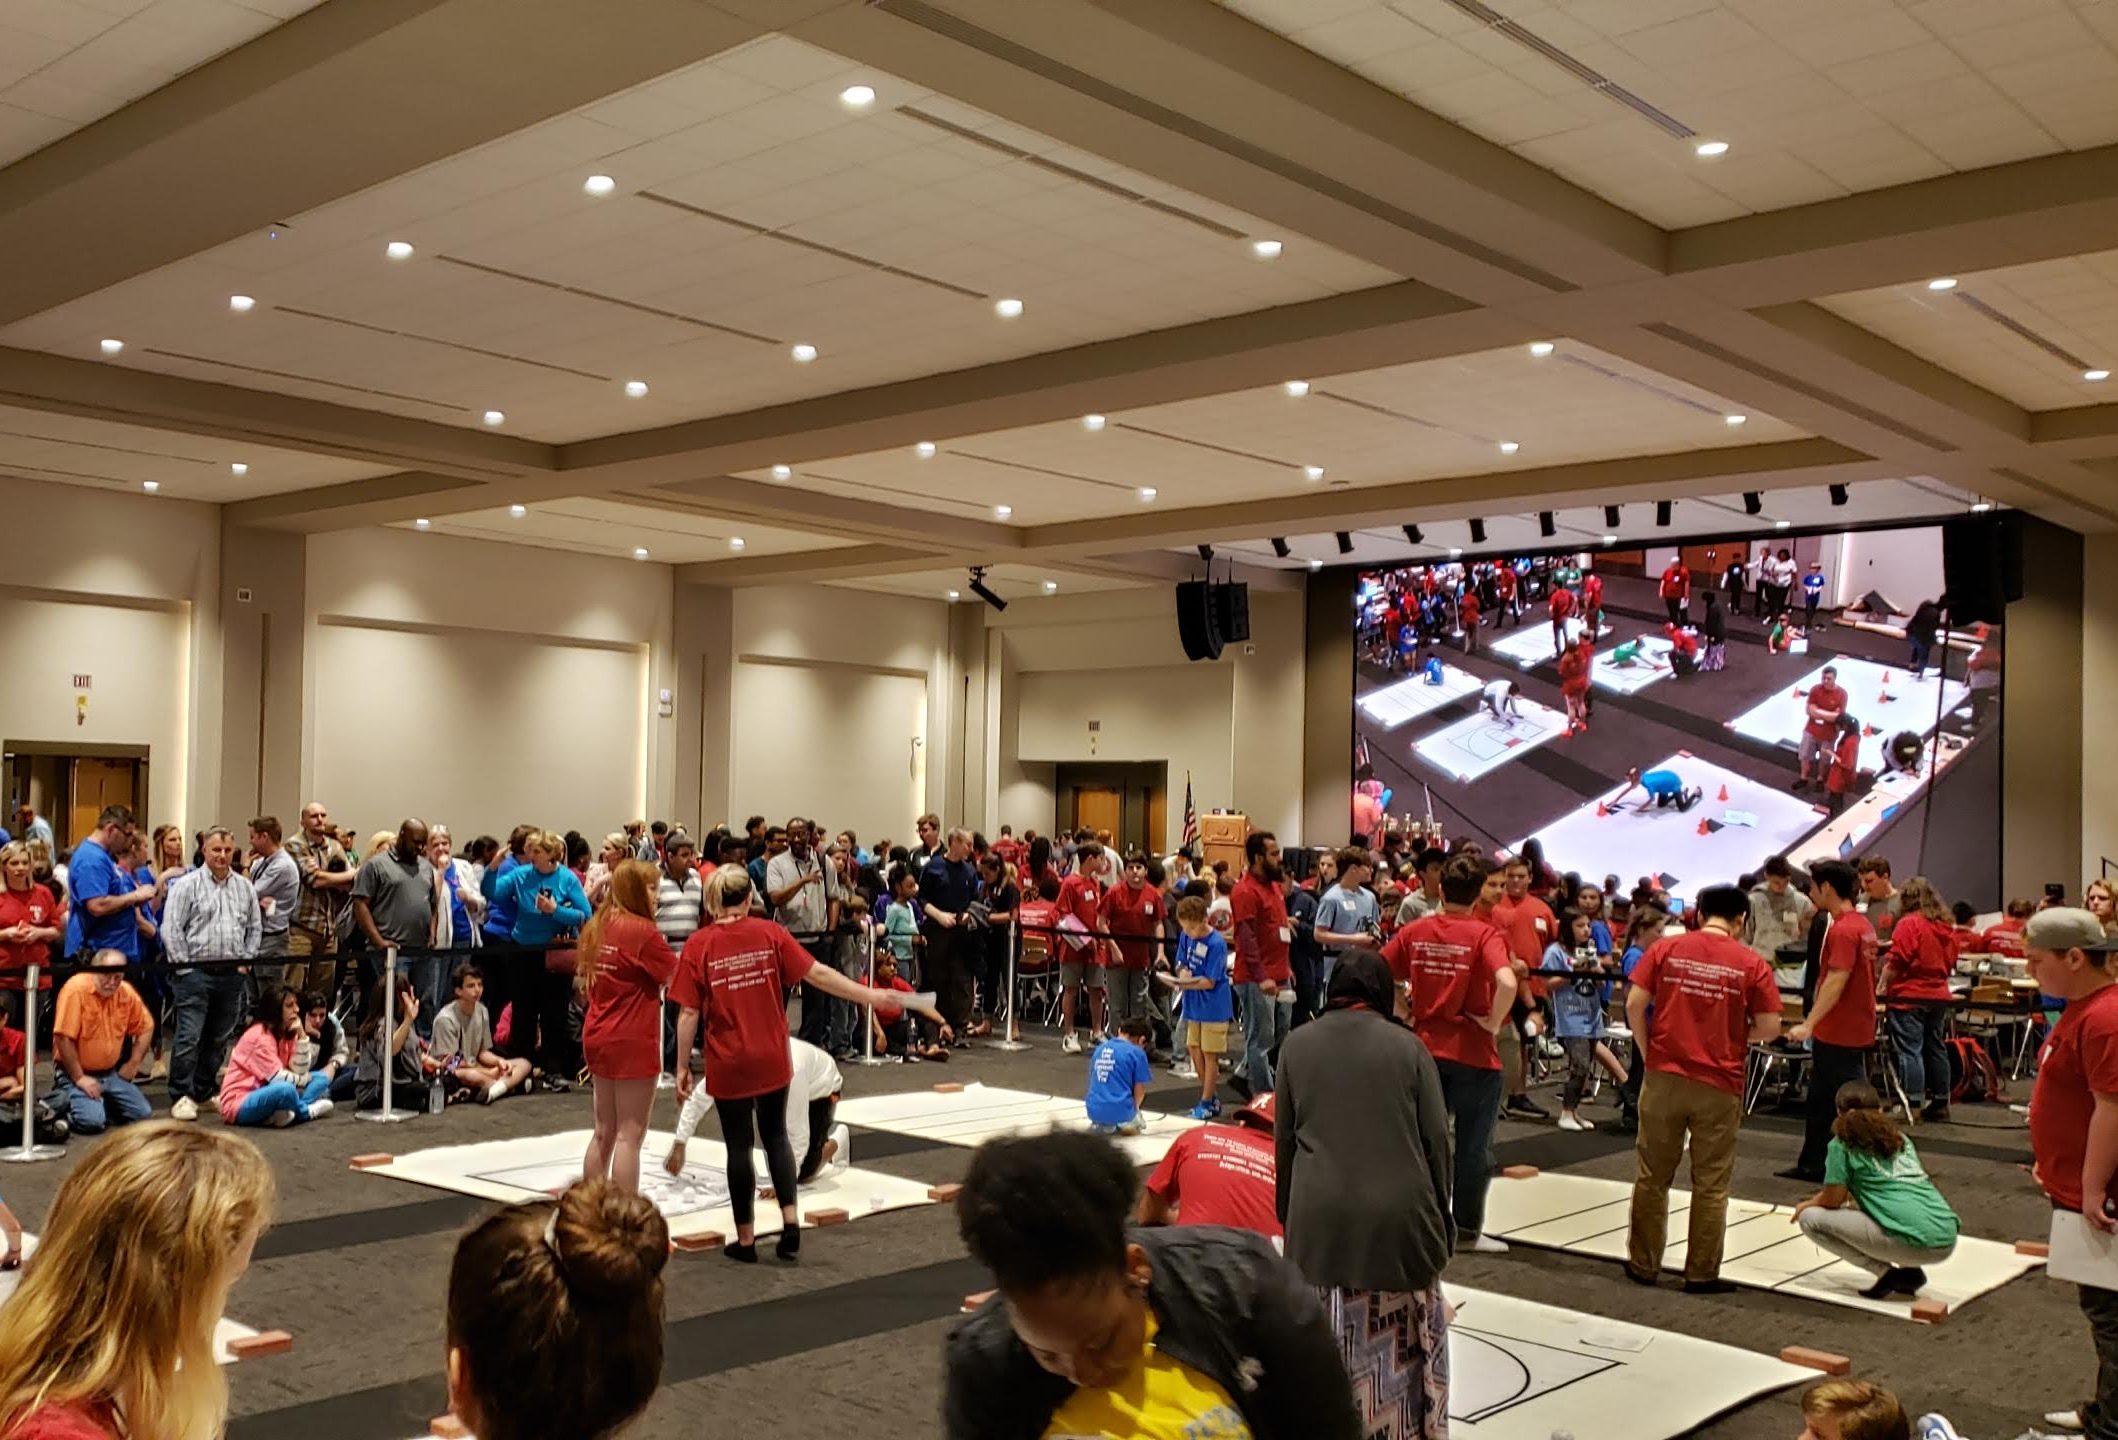 Young students work with UA students and faculty in a large room filled with people